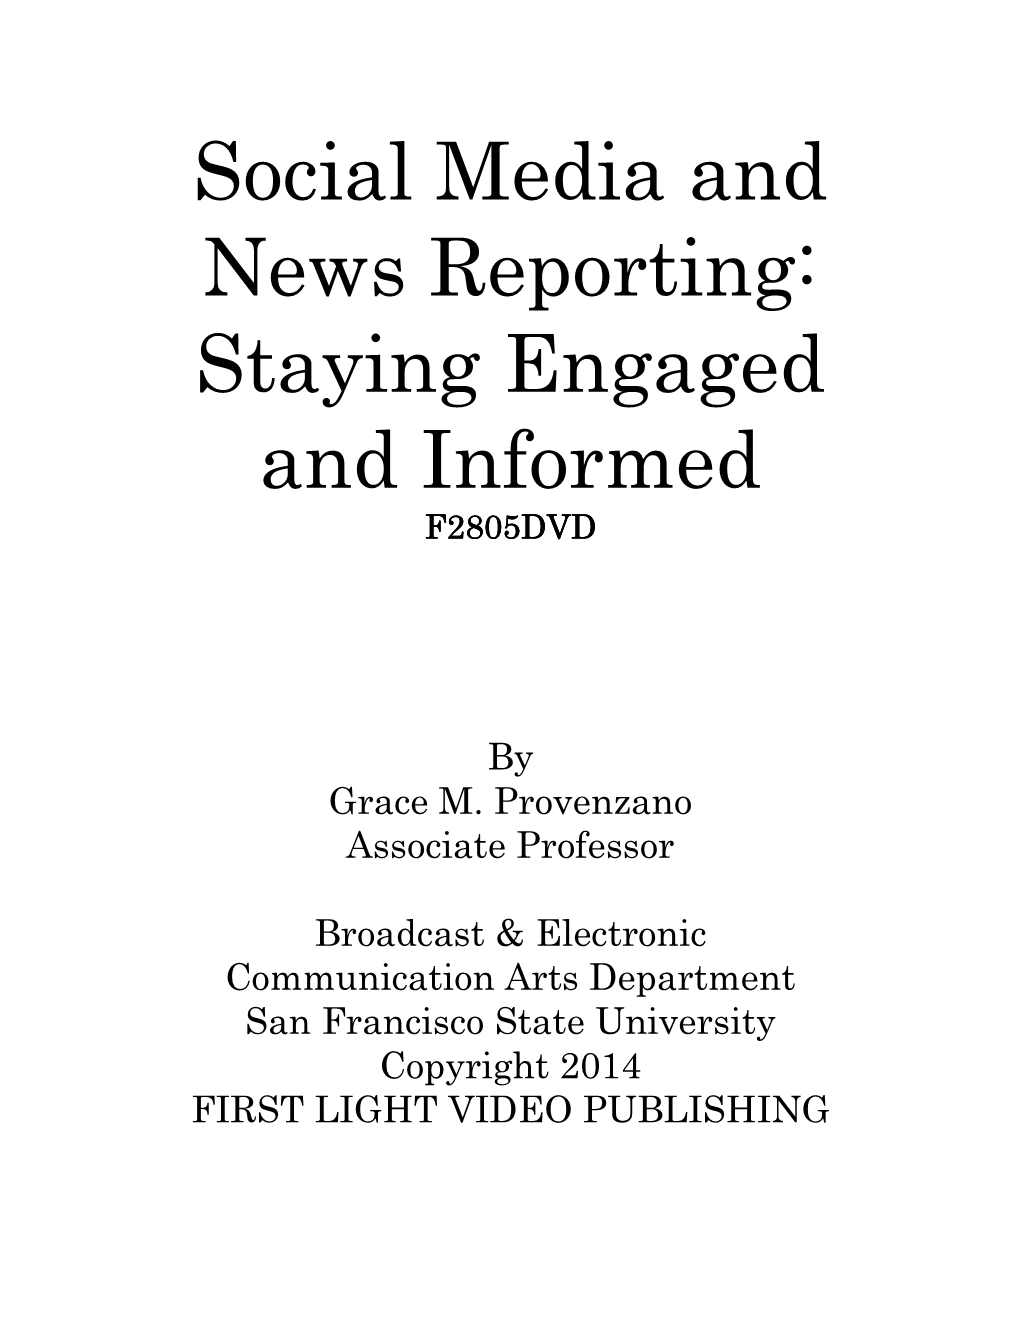 Social Media and News Reporting: Staying Engaged and Informed F2805DVD